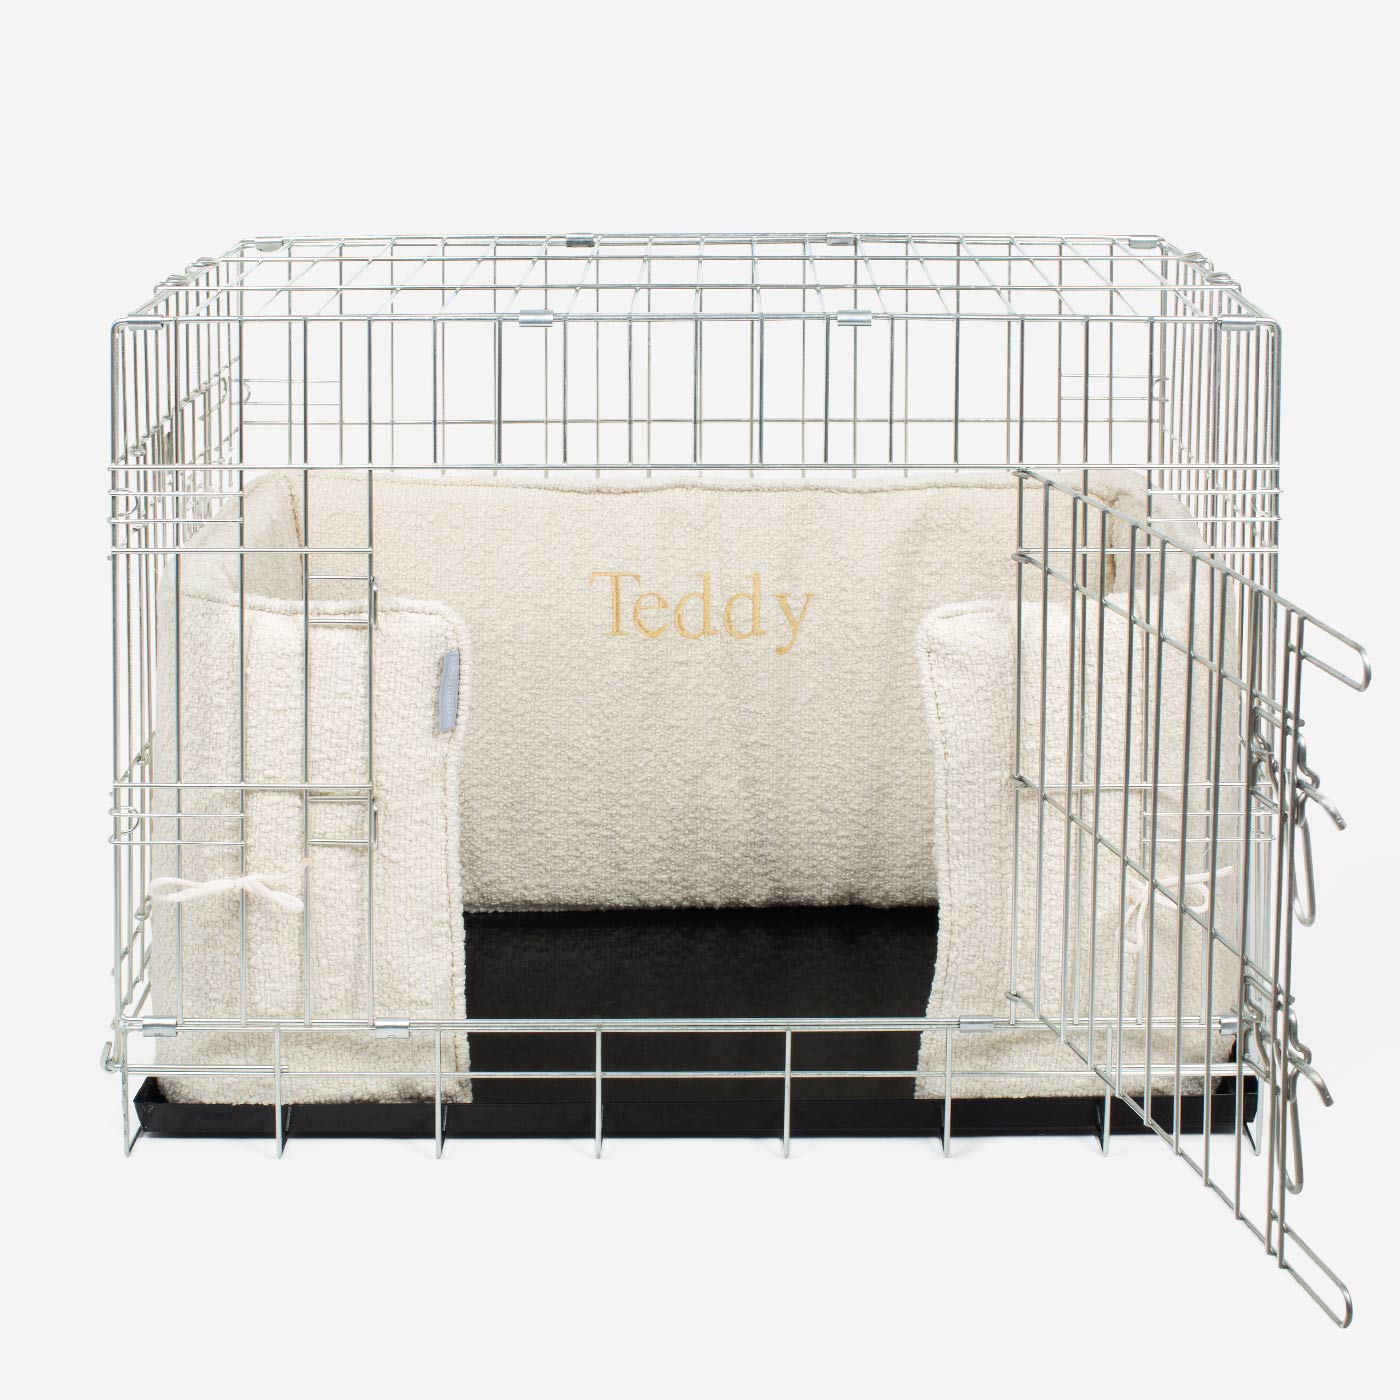 Luxury Dog Crate Bumper, Bouclé Crate Bumper Cover, in Ivory Boucle. The Perfect Dog Crate Accessory, Available Now at Lords & Labradors